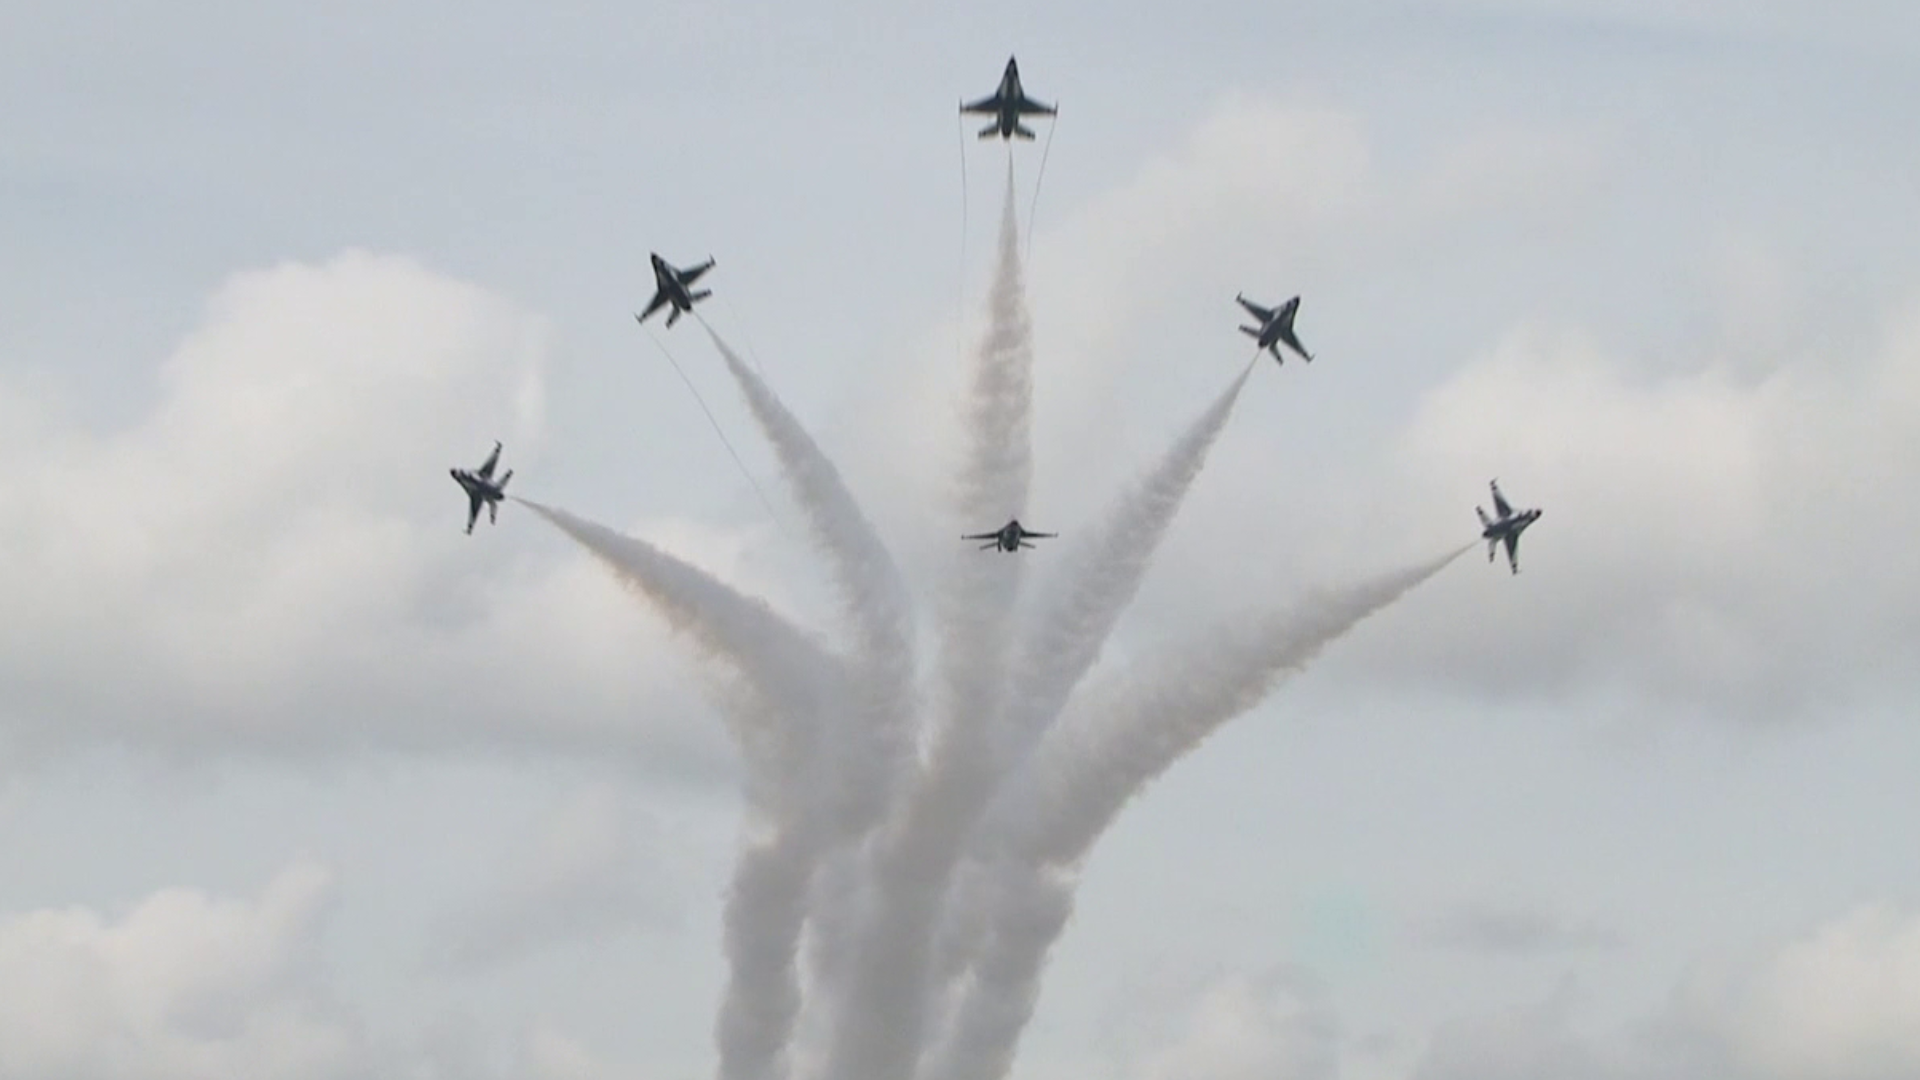 The Thunderbirds paid an aerial tribute to honor Pilot Andy Travnicek.